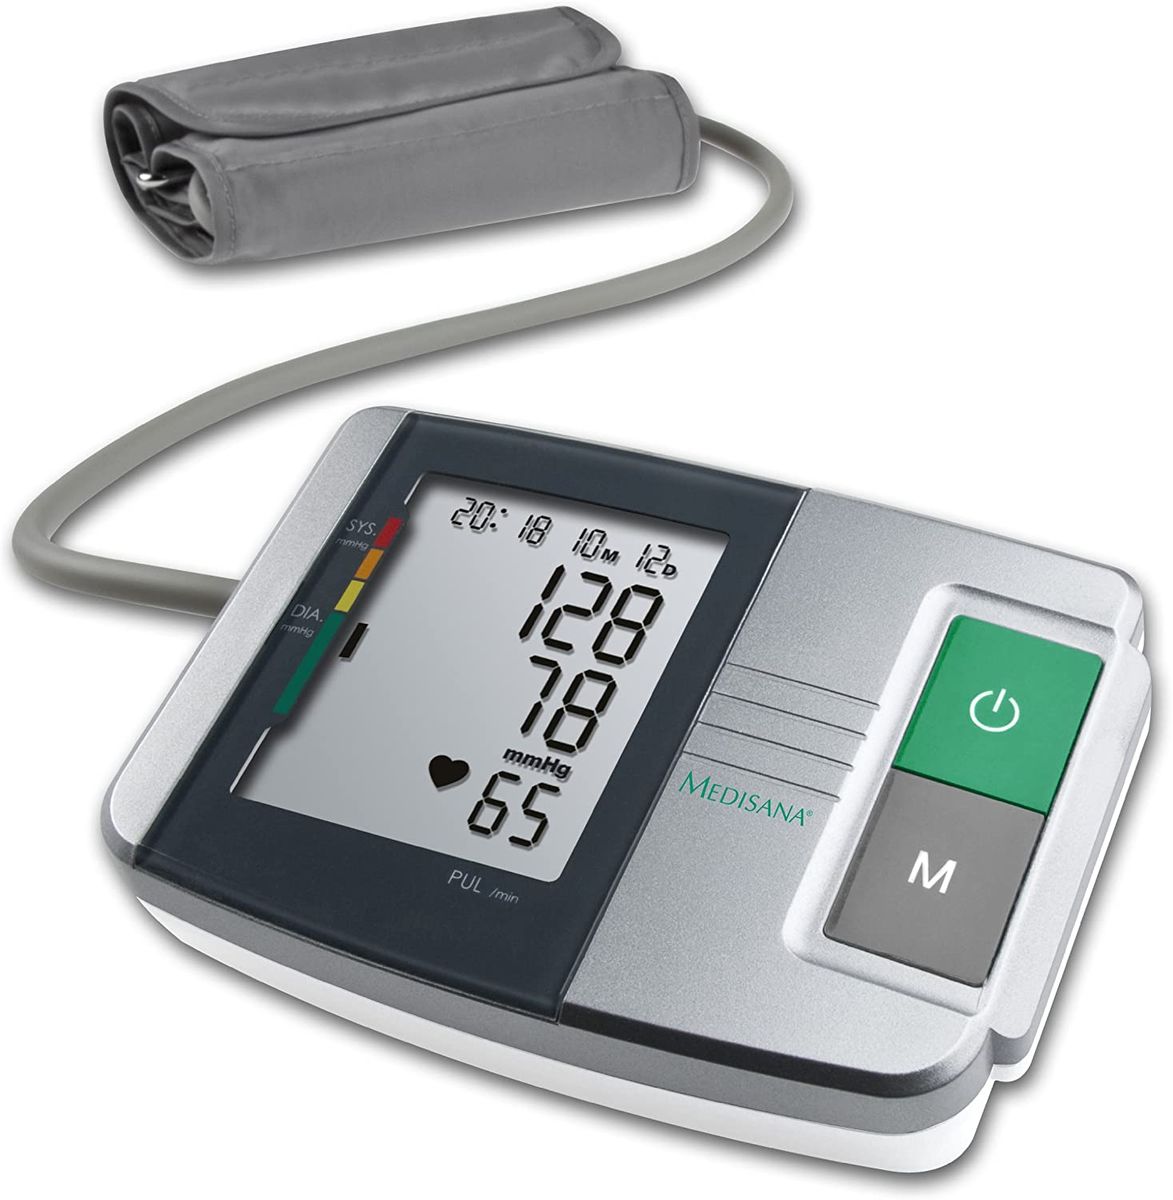 Medisana MTS Upper arm blood pressure monitor without cable, arrhythmia display, WHO traffic light color scale, for precise blood pressure measurement and pulse measurement with memory function.